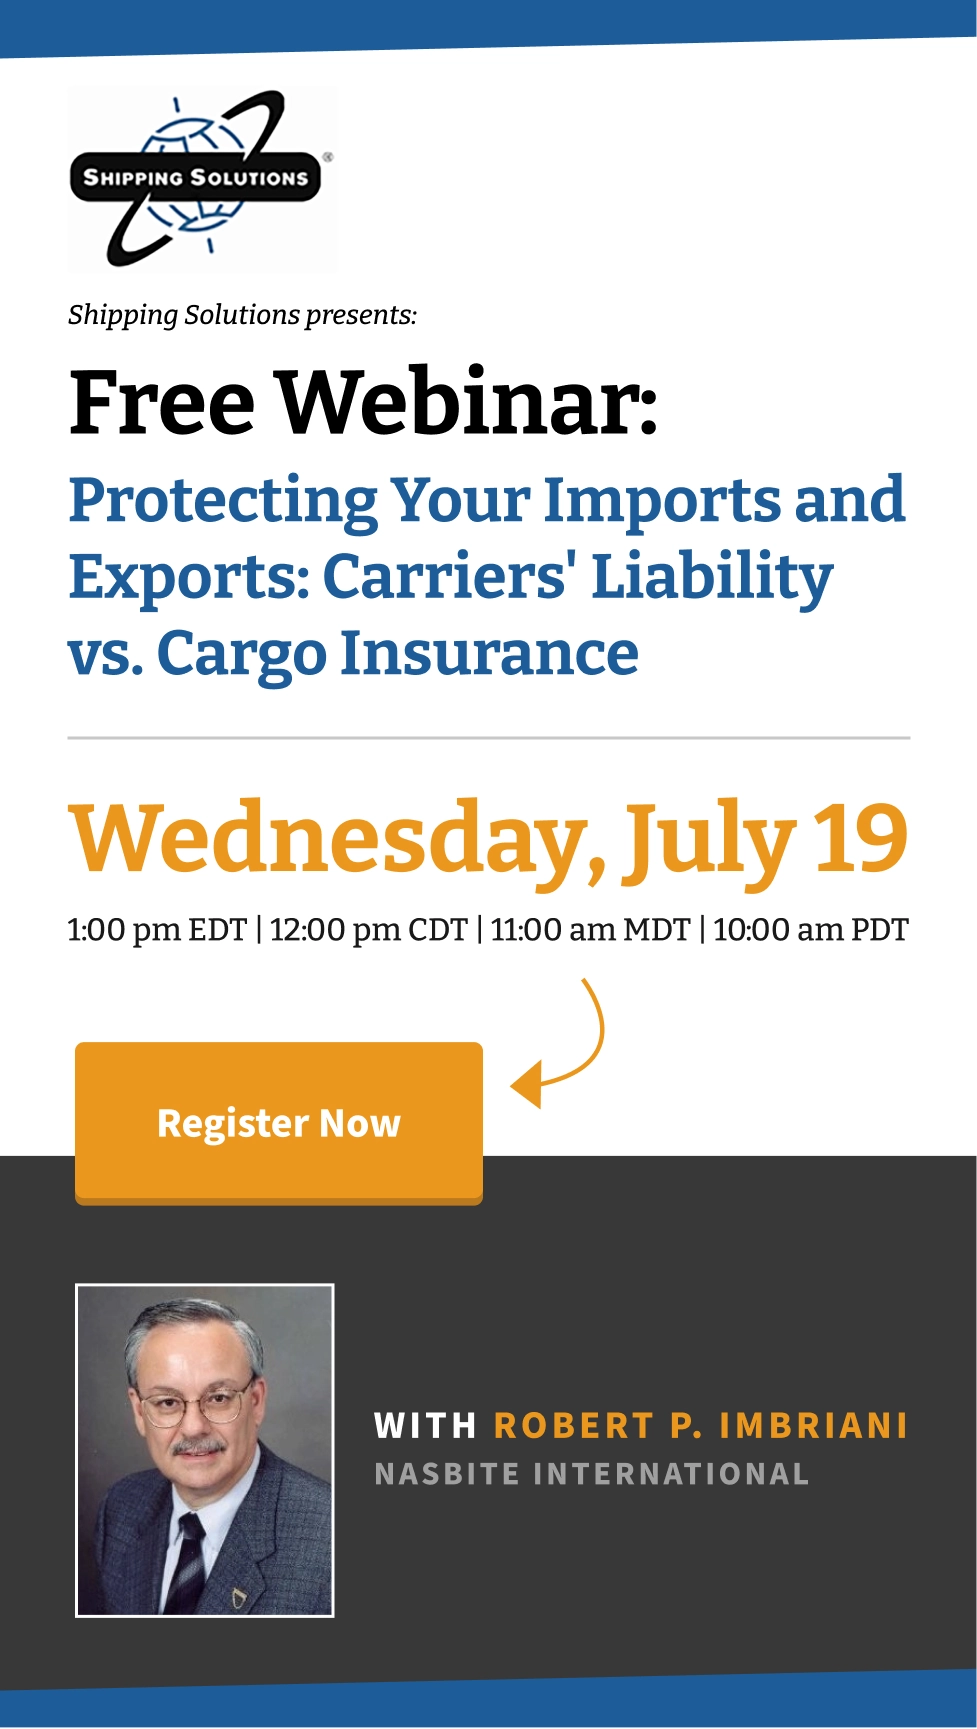 Protecting Your Imports and Exports: Carriers' Liability vs. Cargo Insurance - Shipping Solutions